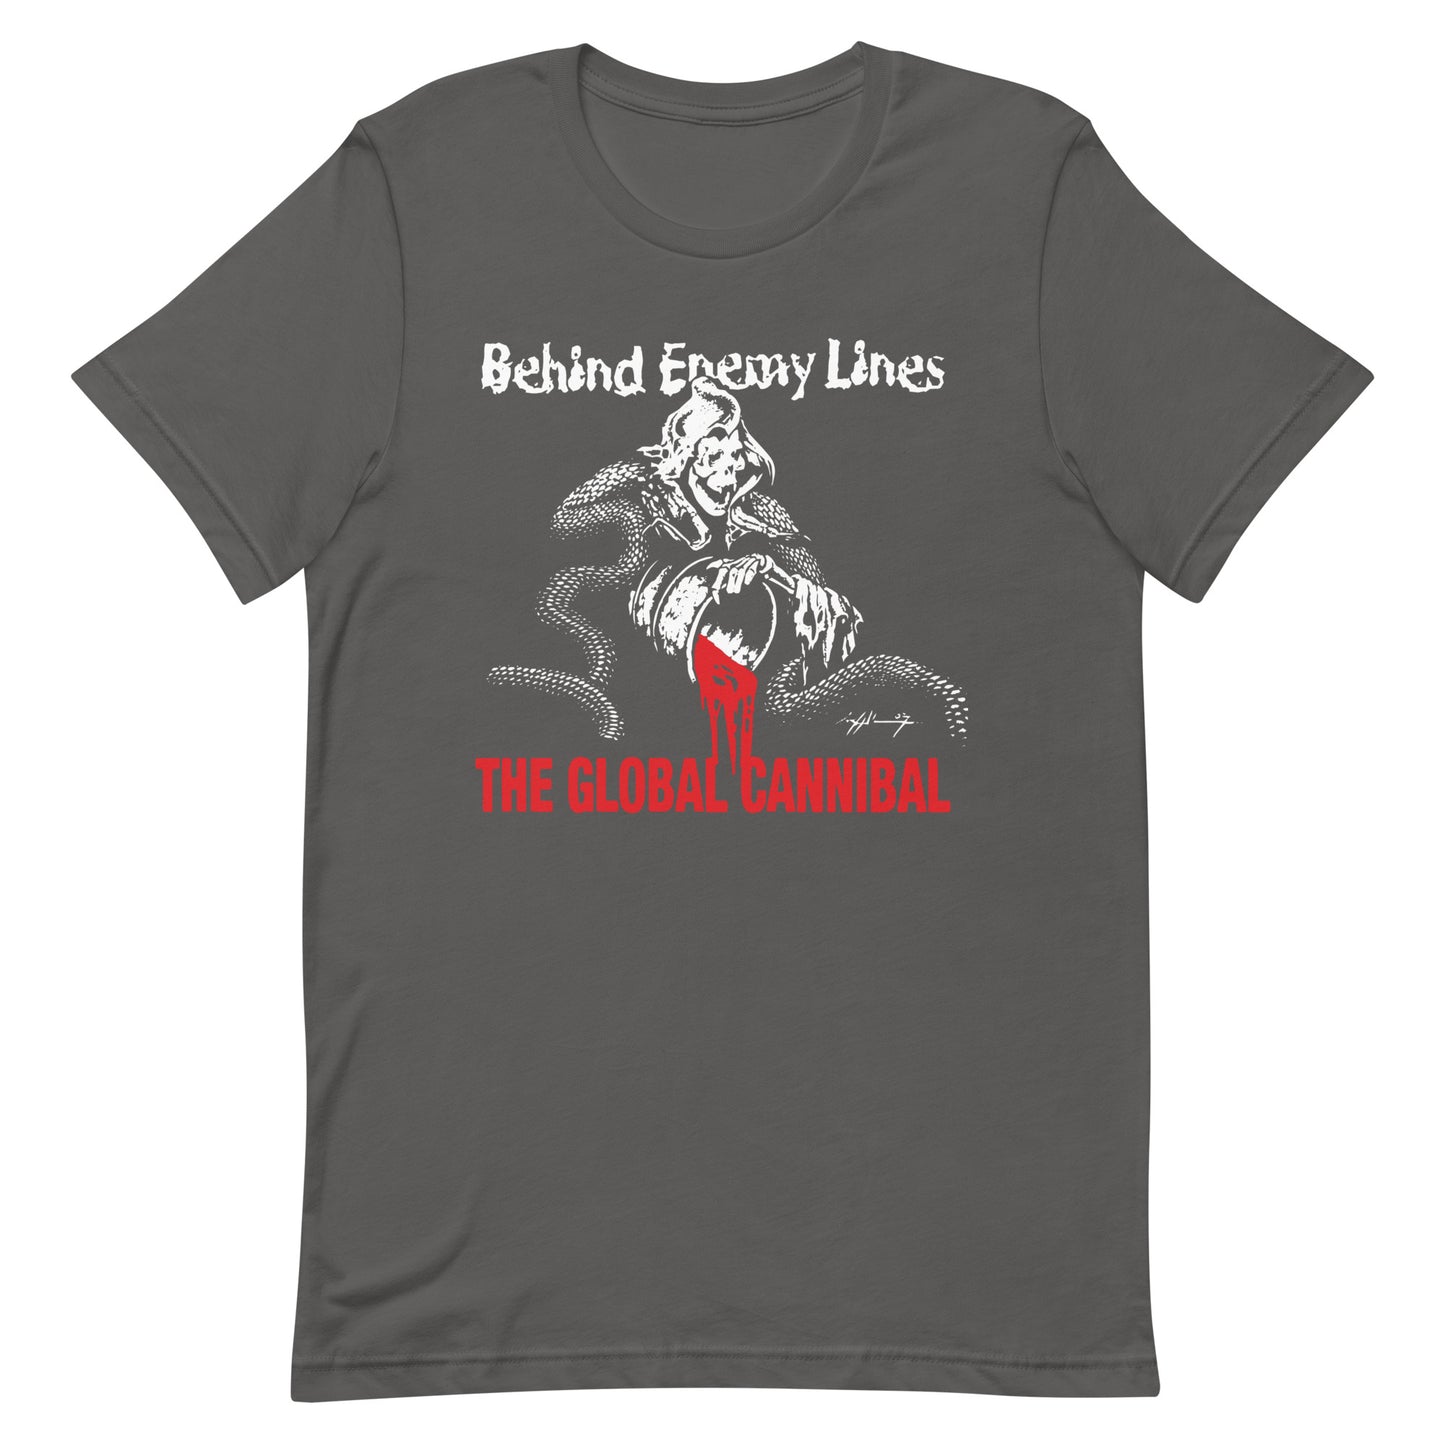 Behind Enemy Lines - The Global Cannibal T-Shirt